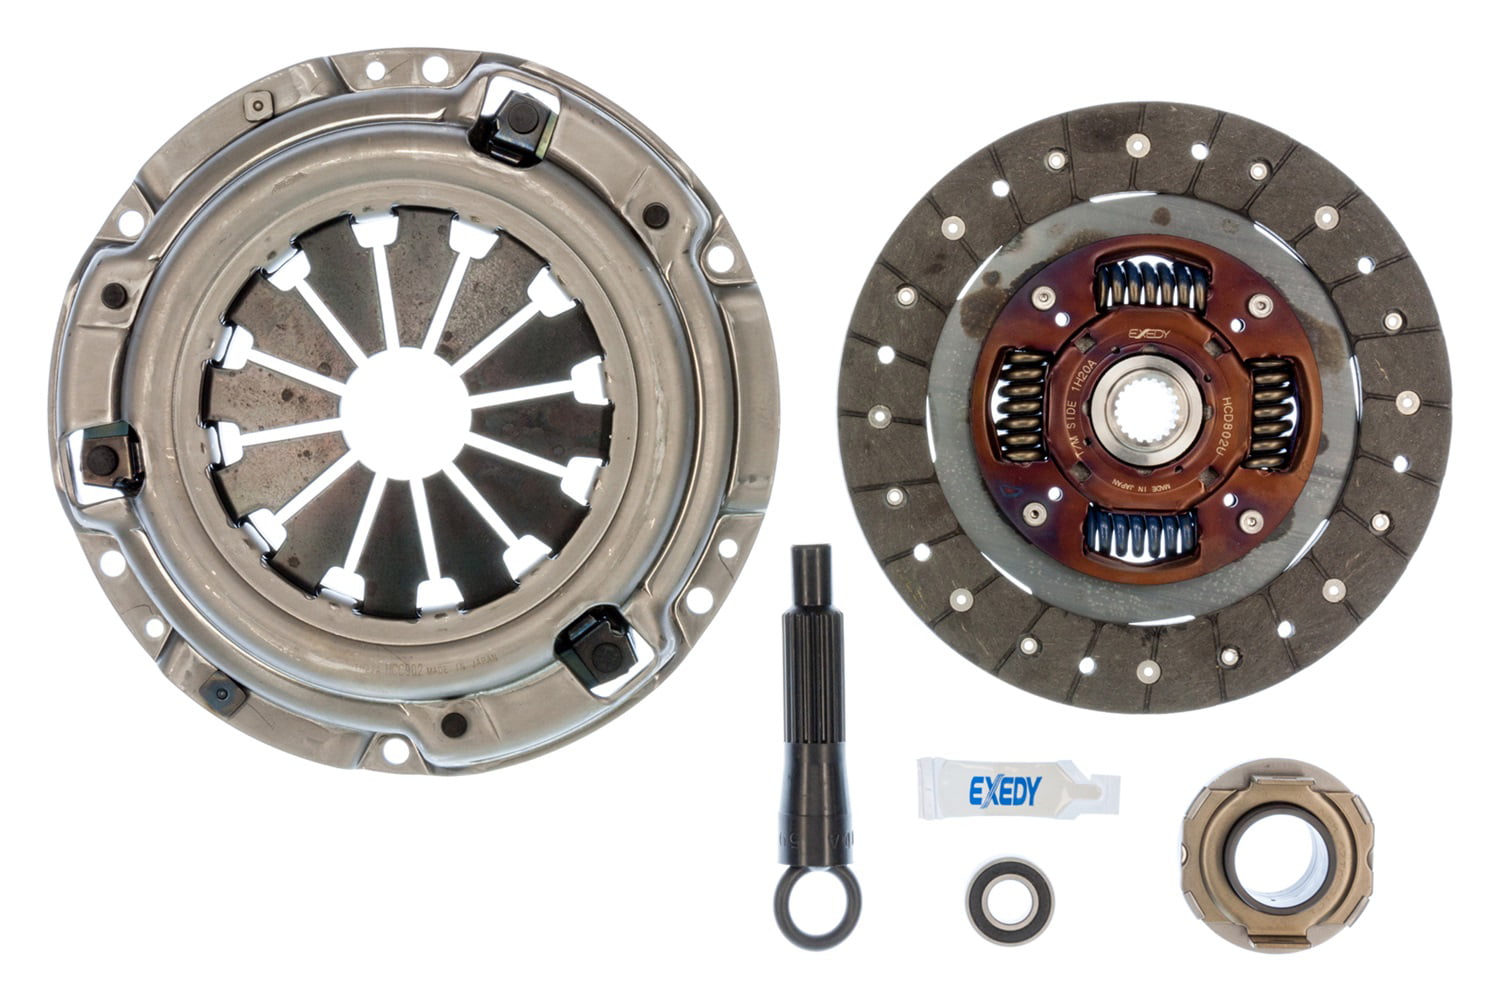 OEM PERFORMANCE CLUTCH and 10 LB FLYWHEEL KIT for 89-91 CIVIC CRX EF8 EF9 B16A1 